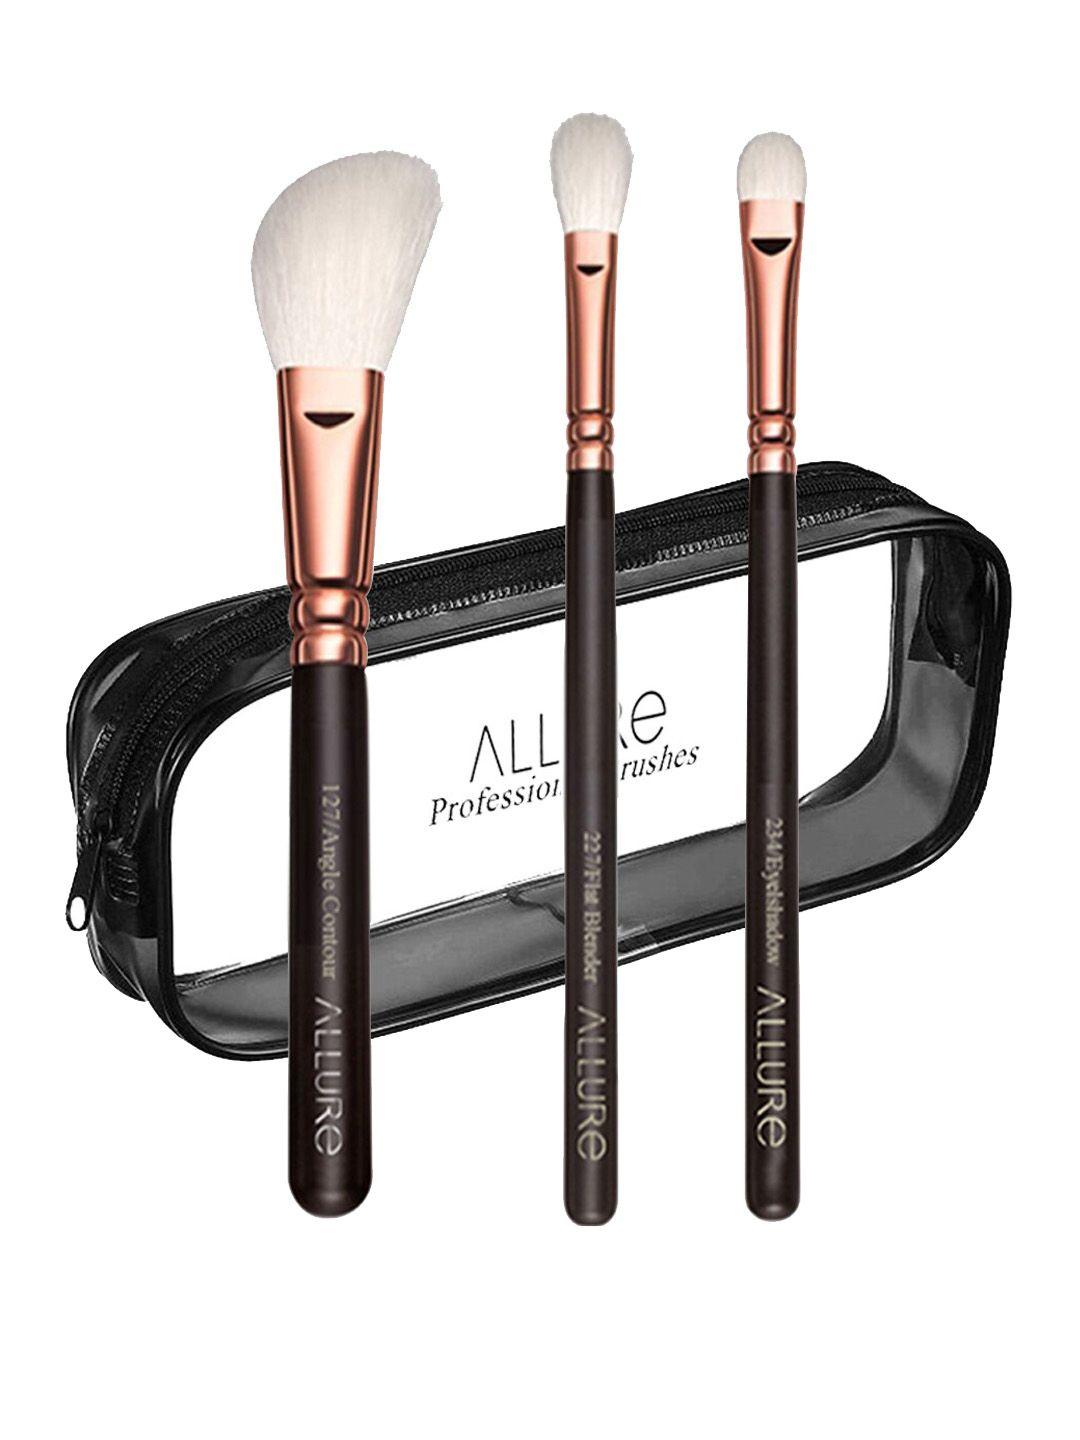 allure essential trio brush set with travel pouch